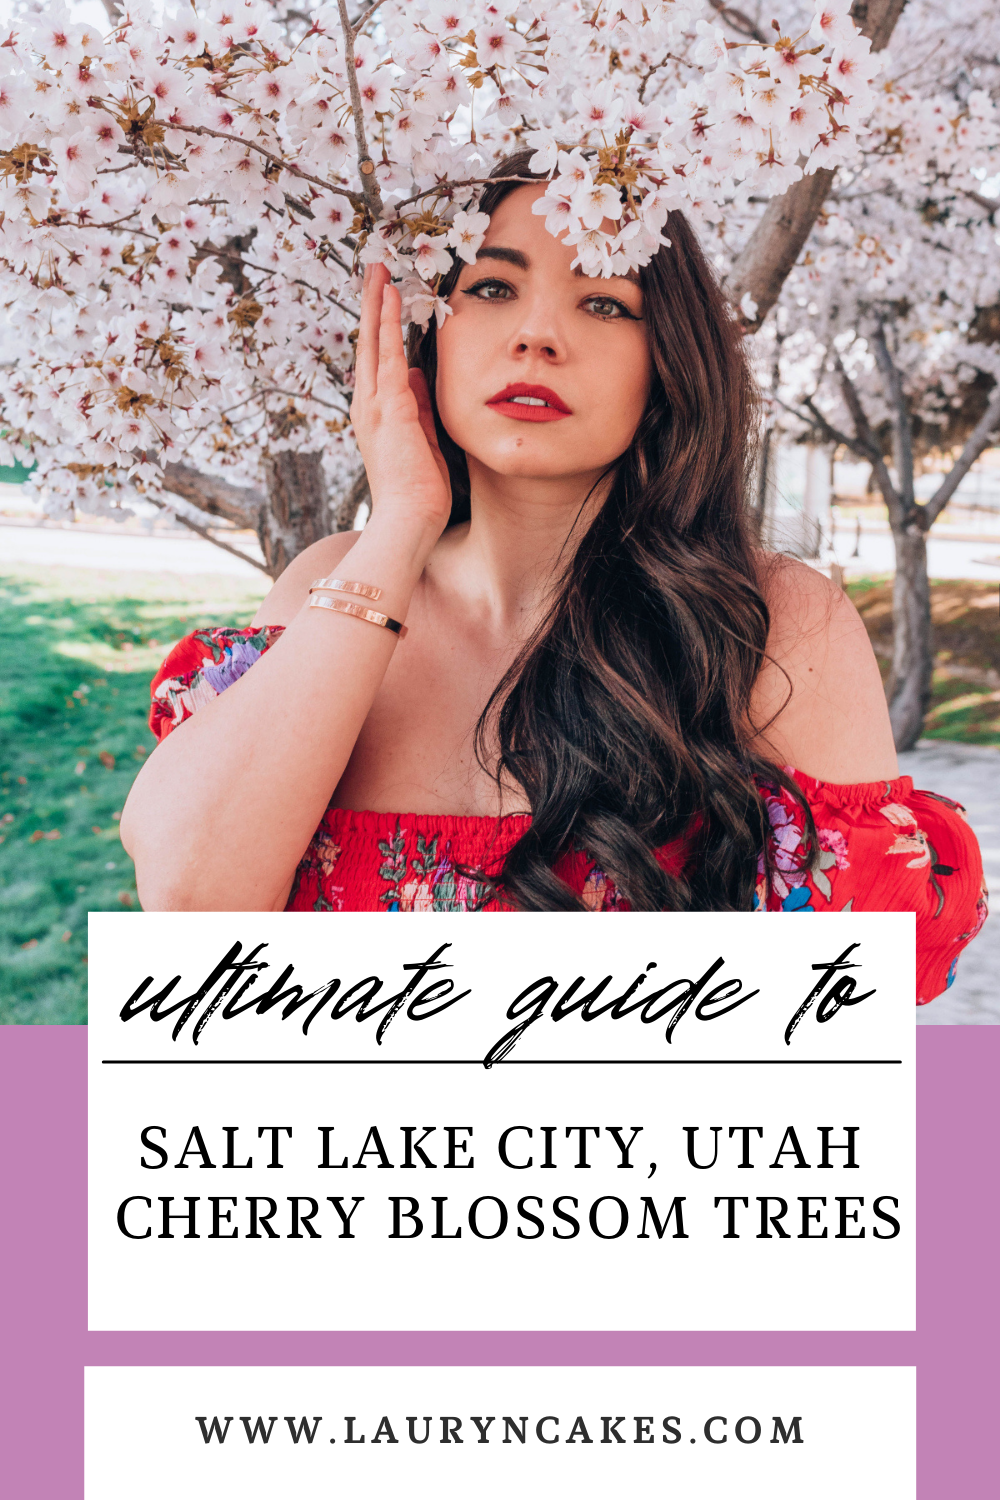 image of a woman wearing an off the shoulder red top with her hand near her face underneath a blooming tree. Image has words that say, "ultimate guide to Salt Lake City, Utah Cherry Blossom Trees"